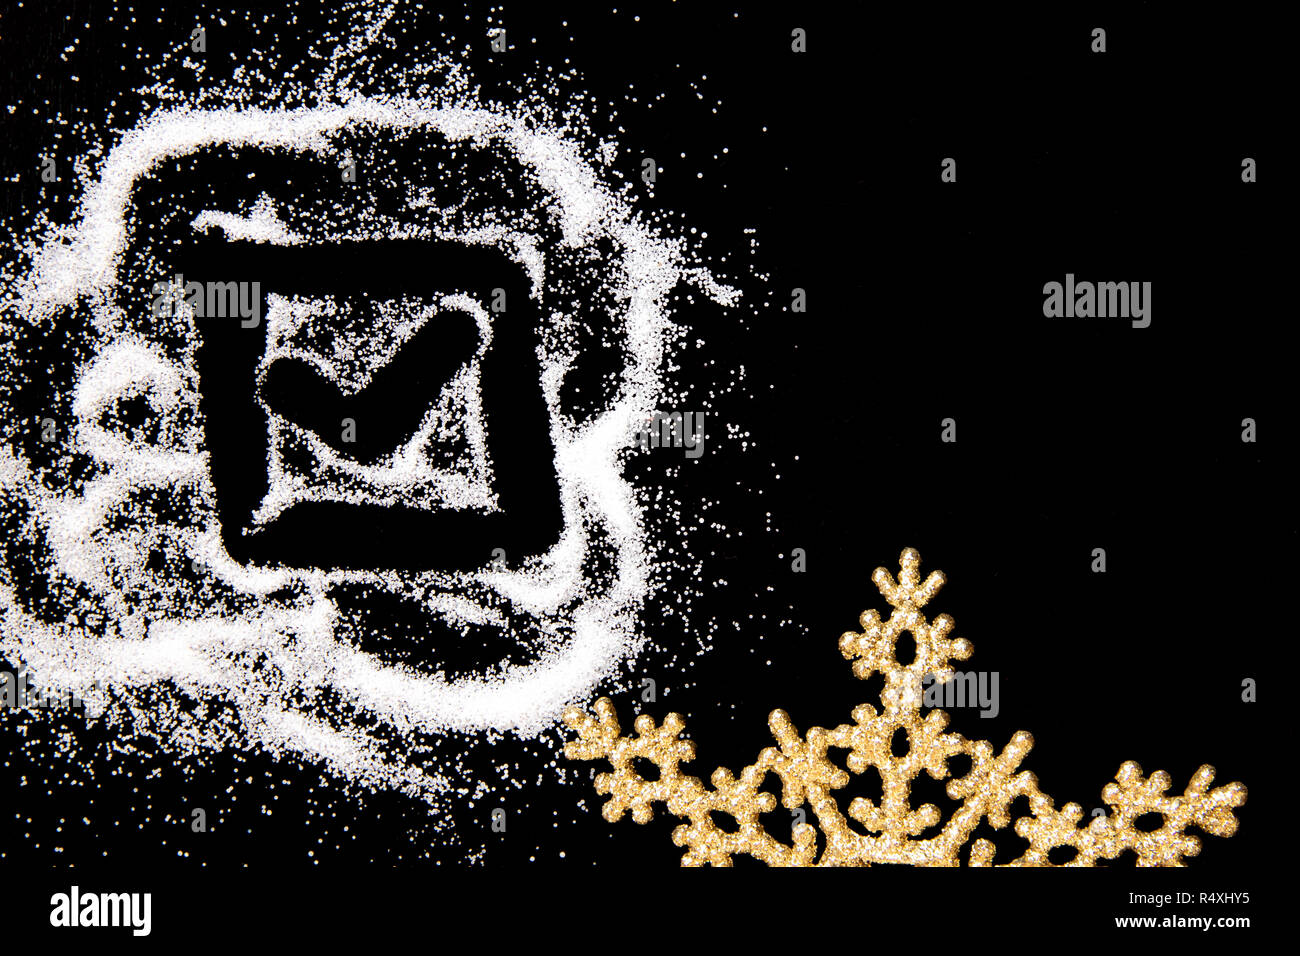 Checking mark symbol in checkbox drawing by finger on white salt powder spot cloud on left side on black background. Golden snowflake. New year and Christamas tick concept with place for text Stock Photo